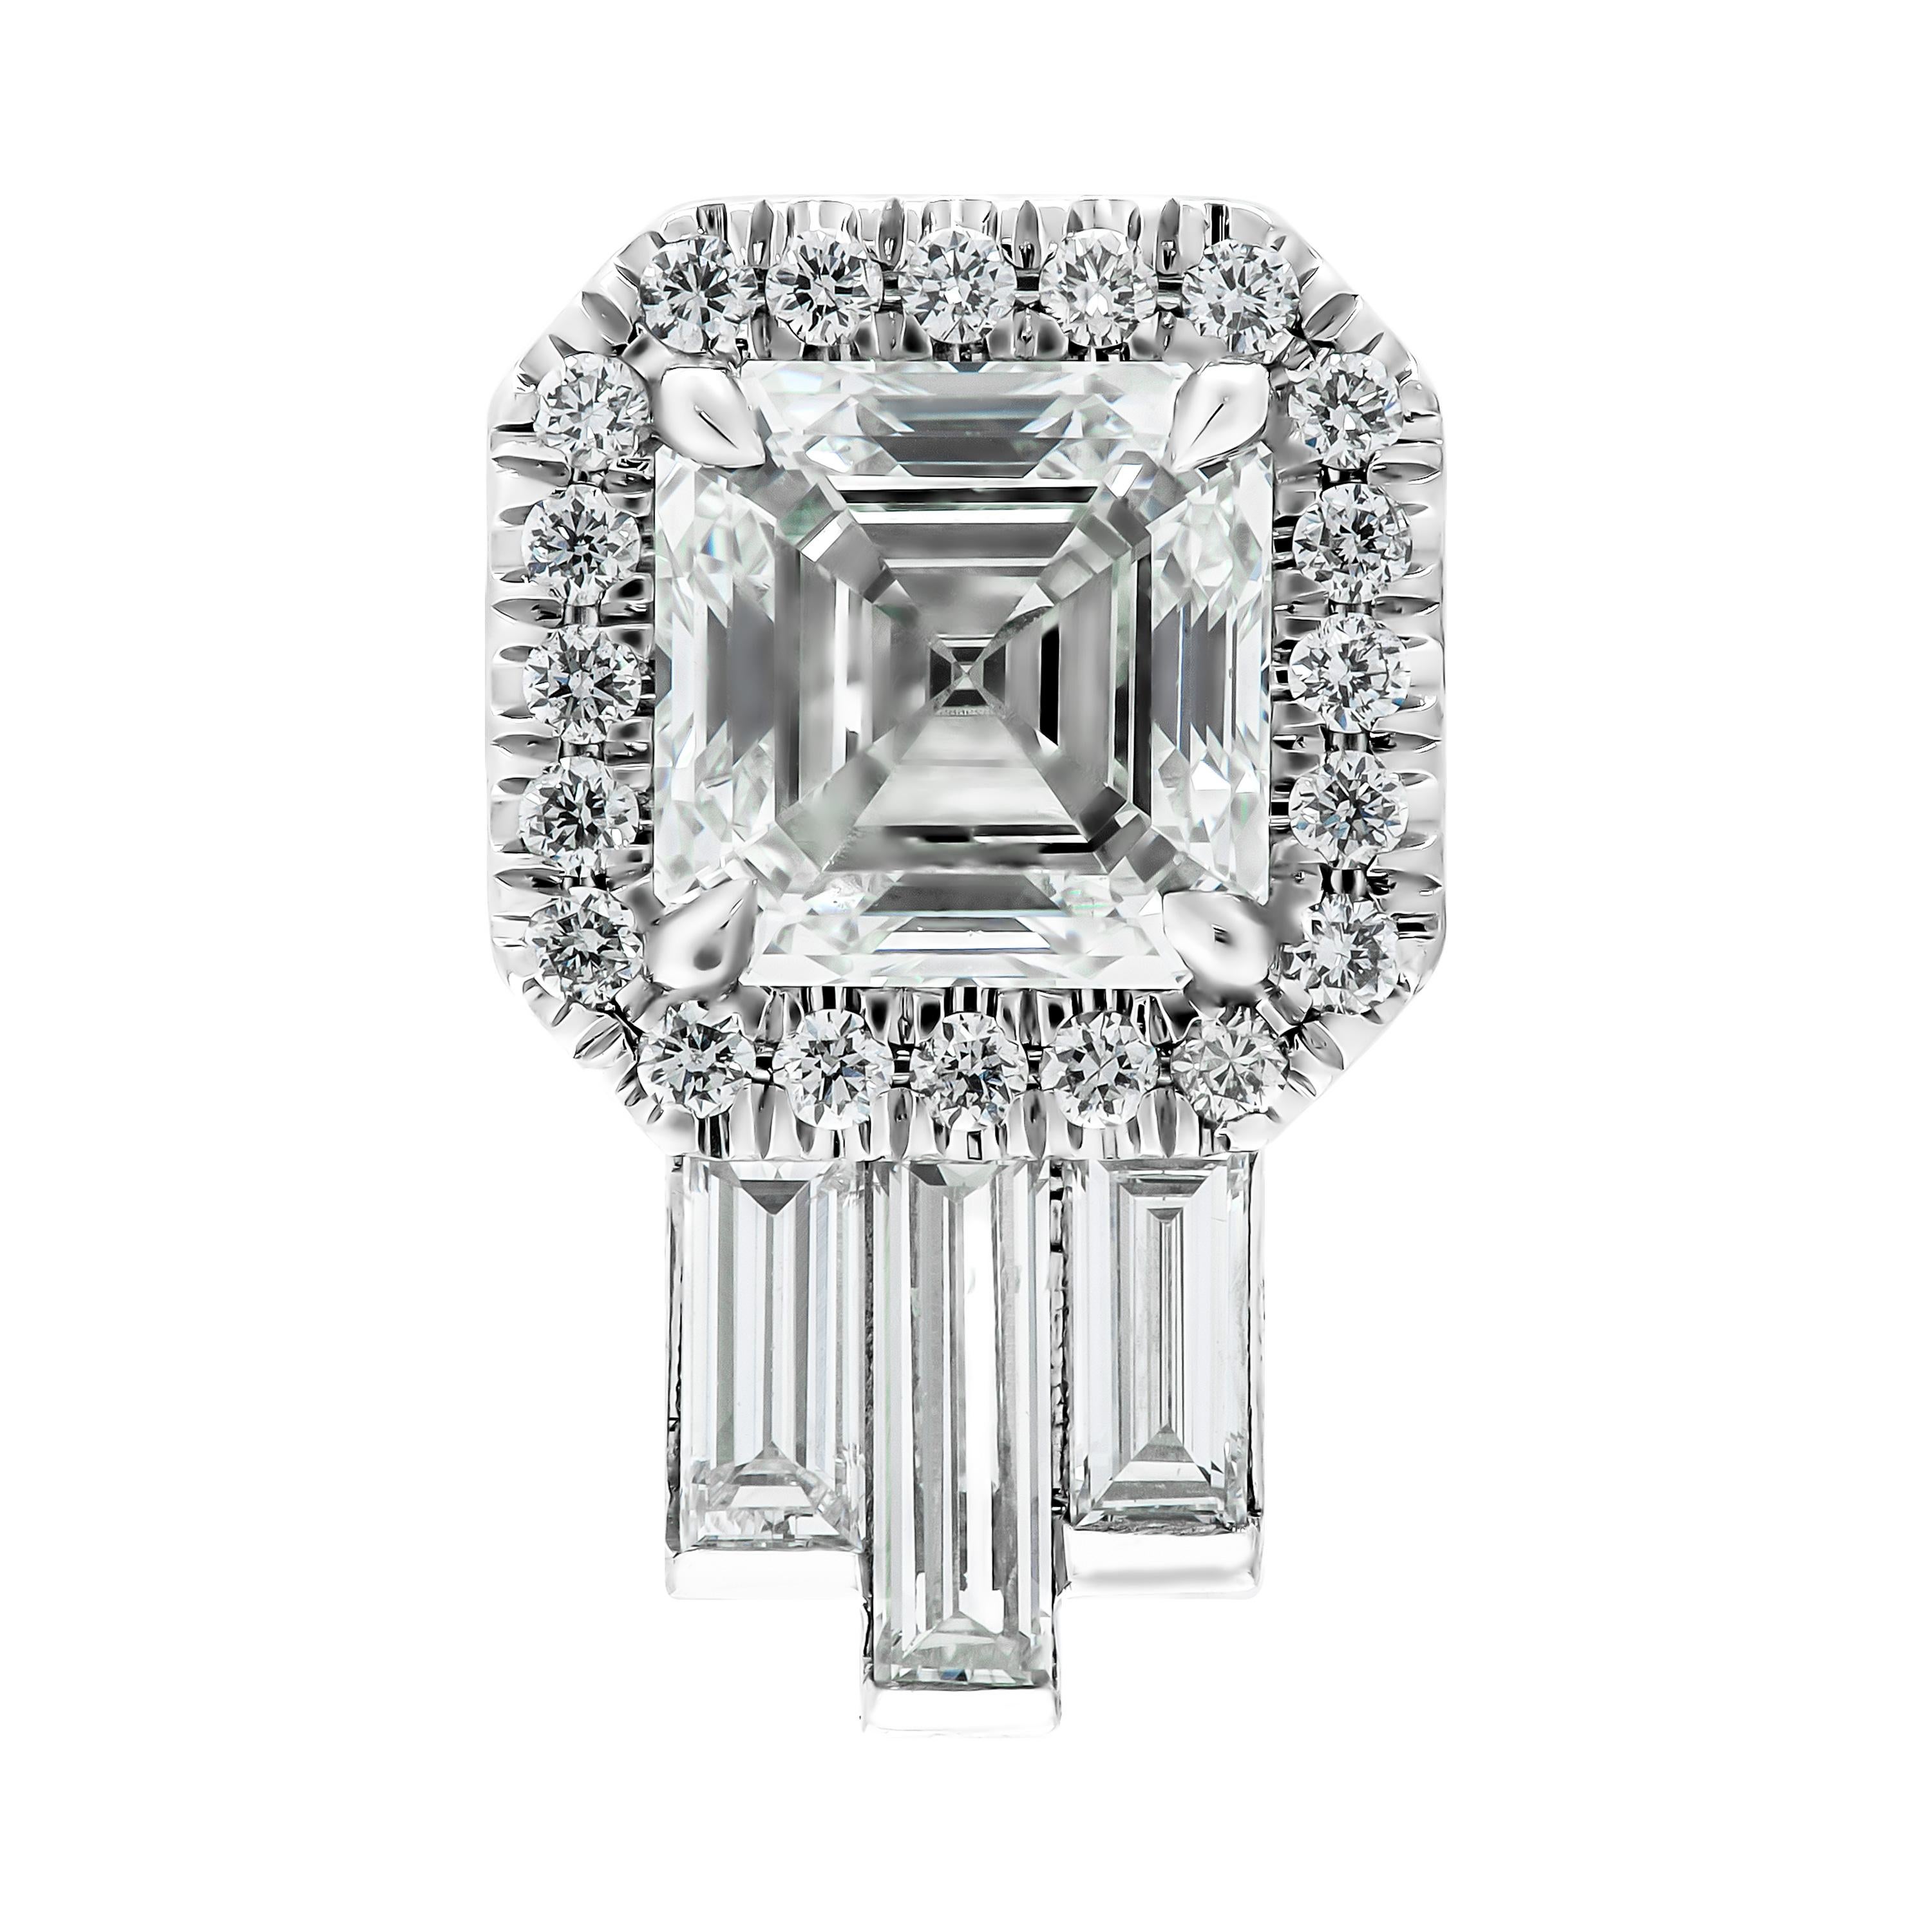 Diamond Earrings with Asscher Cut GIA Certified Diamonds 0.90 ct each stone: 
                              I VVS1 GIA#5201829685;
                             H VVS2 GIA#5201852390 
Mounted in Platinum 950, featuring halo around center stones, full